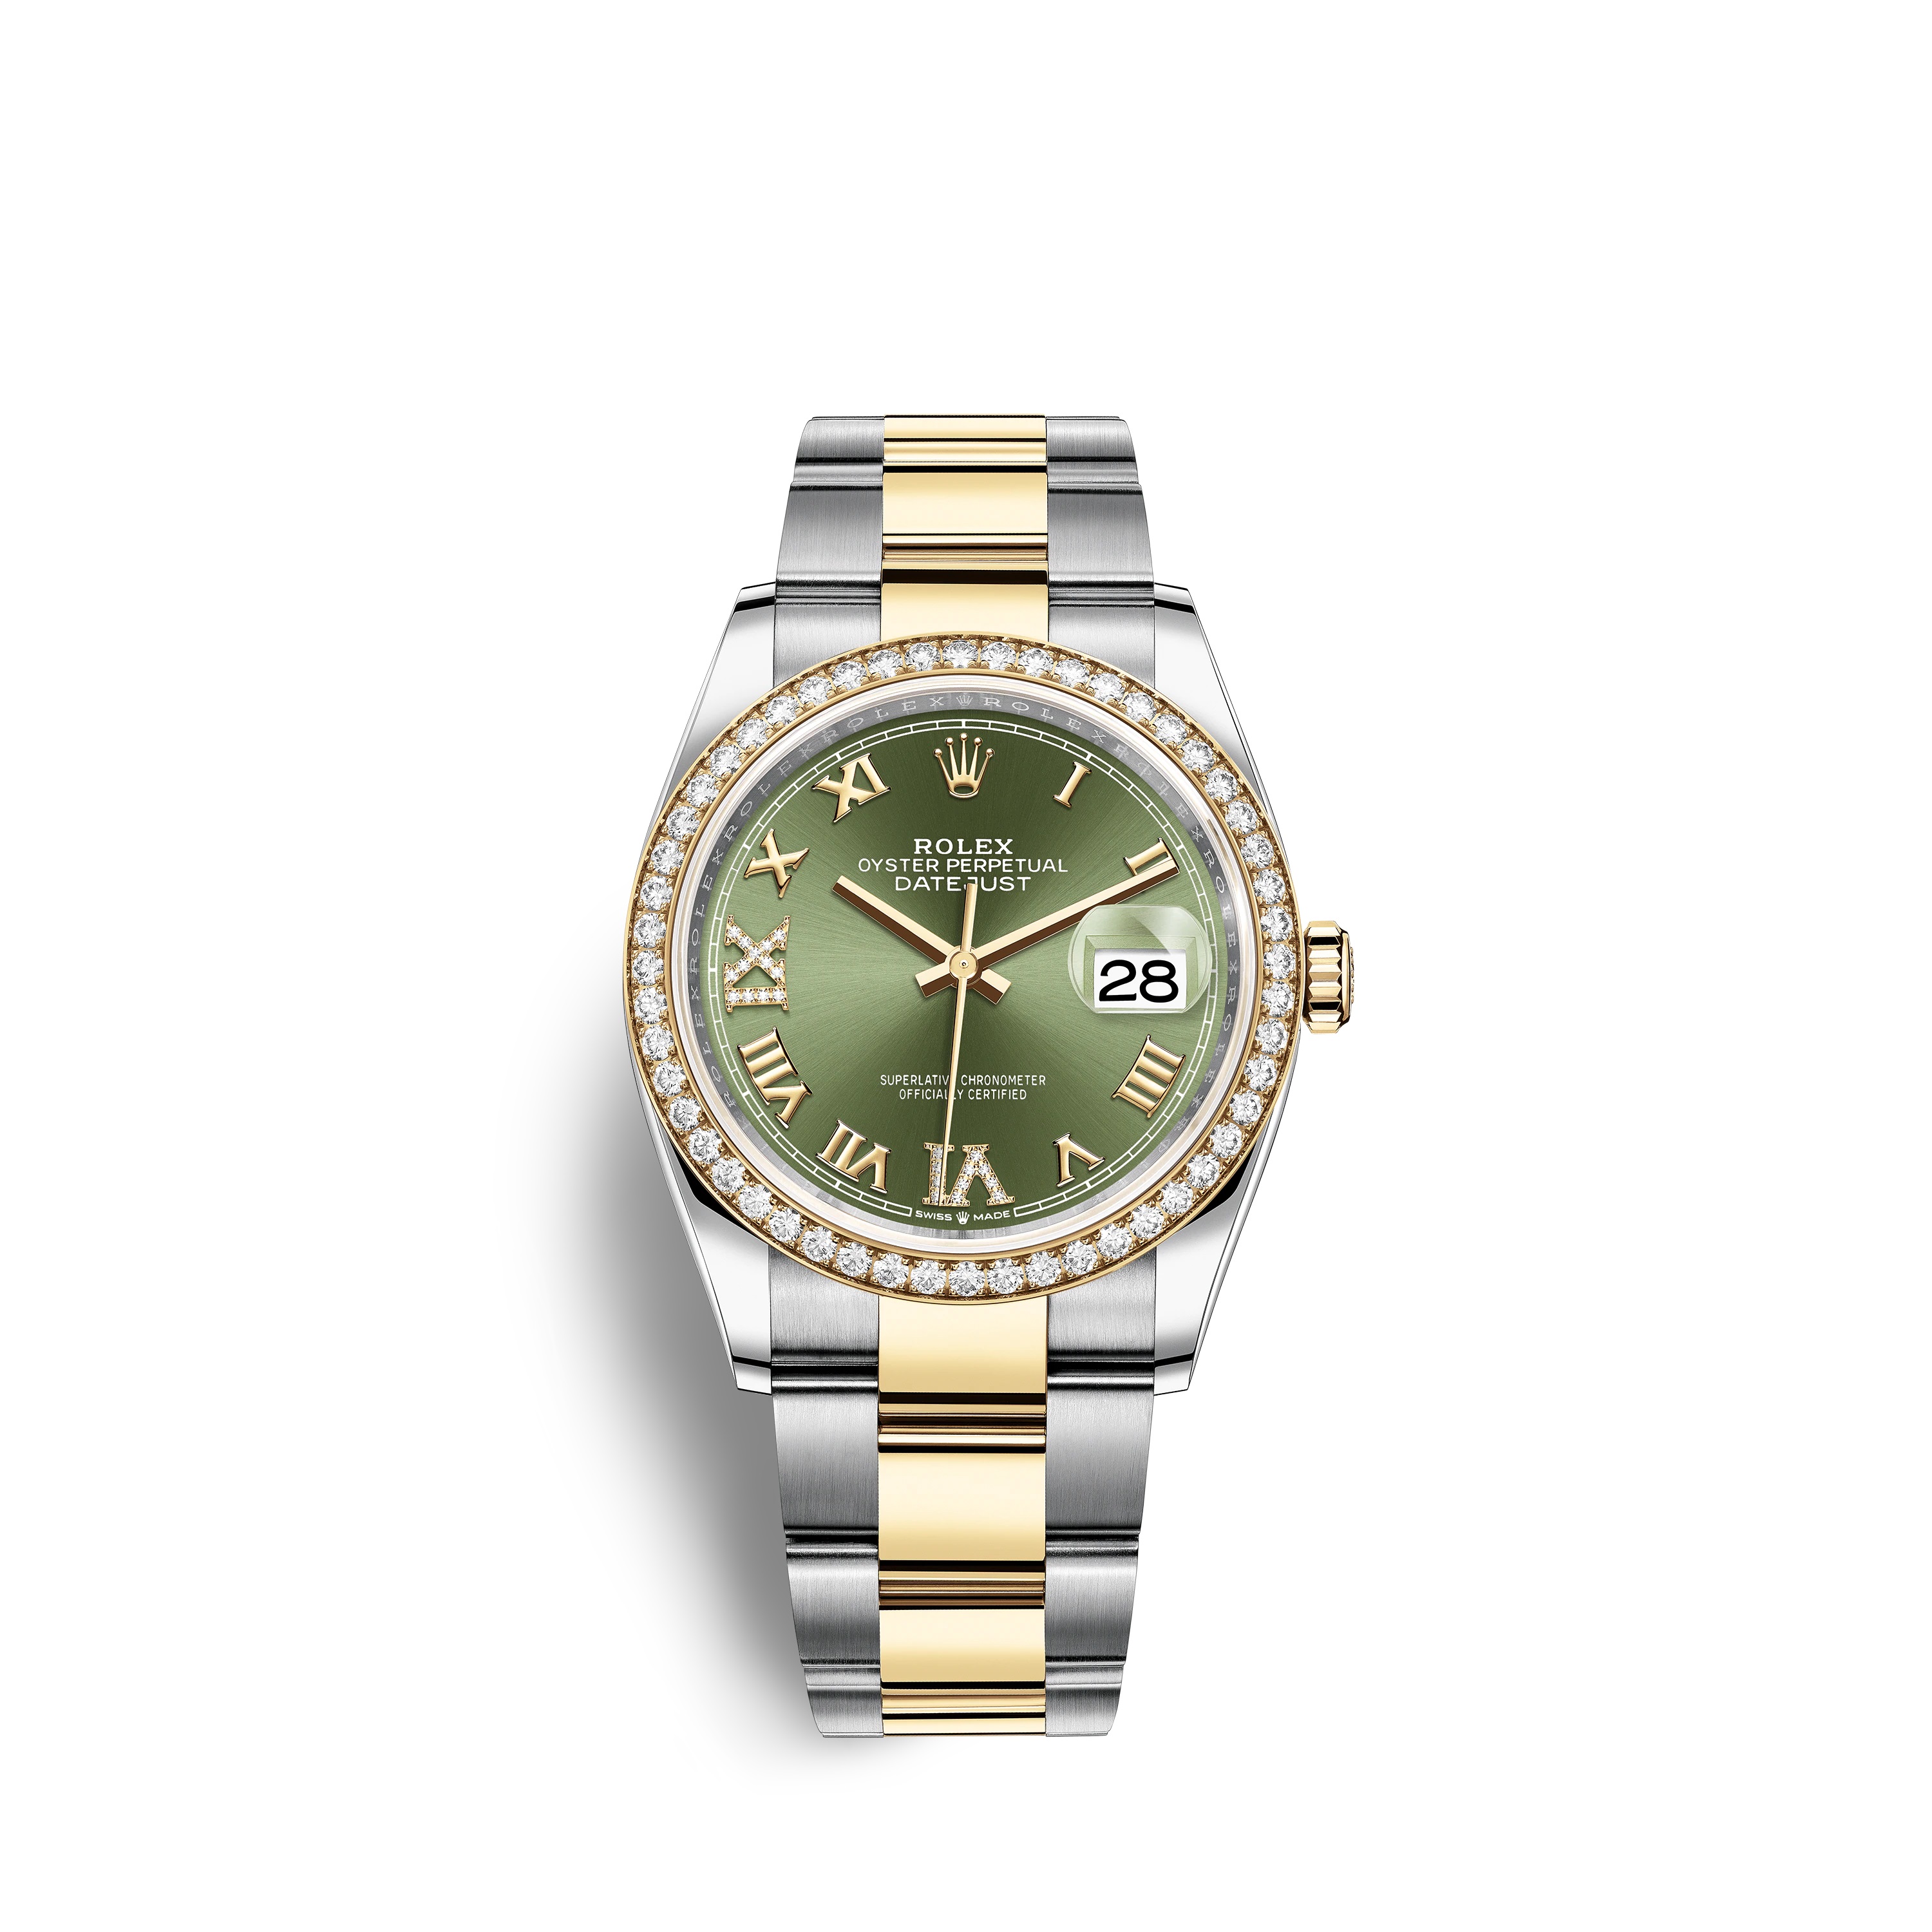 Datejust 36 126283RBR Gold & Stainless Steel Watch (Olive Green Set with Diamonds)